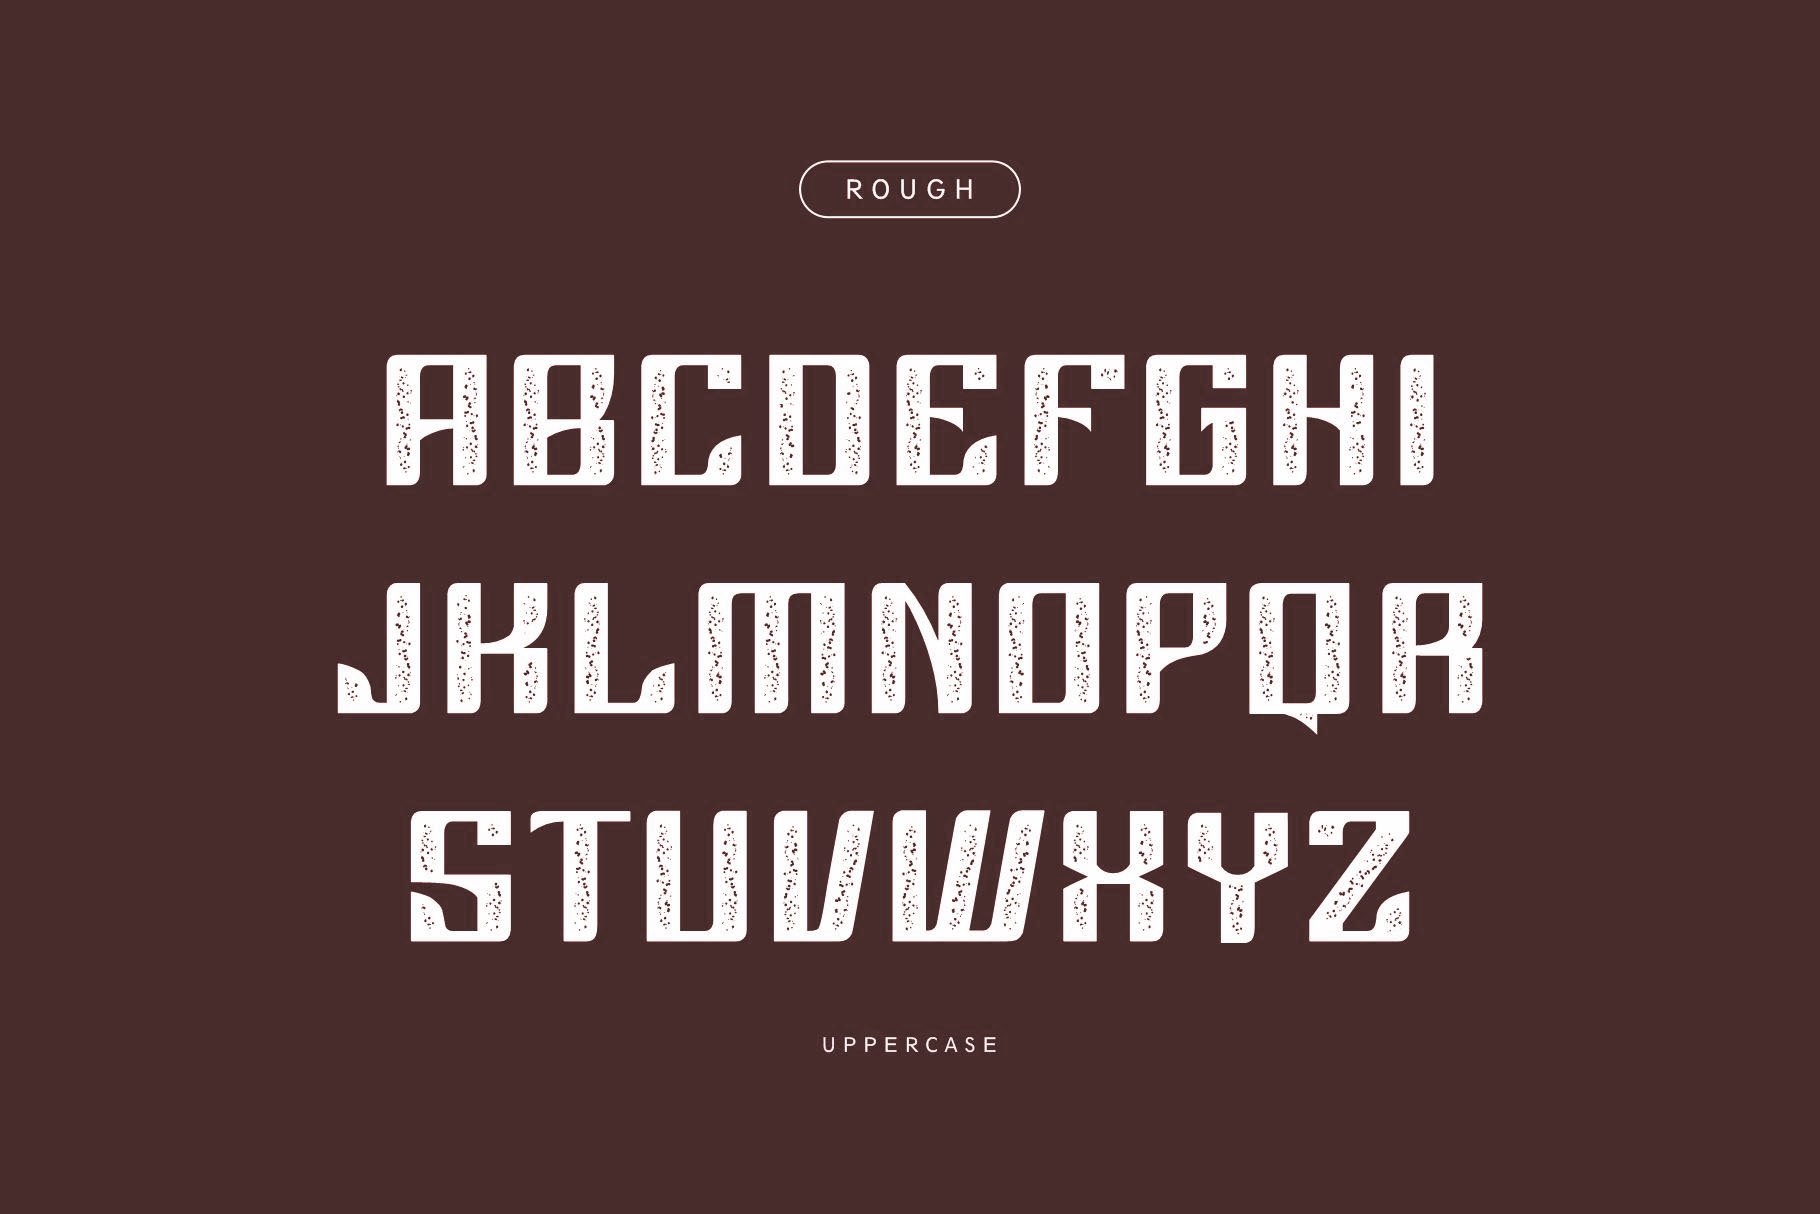 nexhope font preview5 264